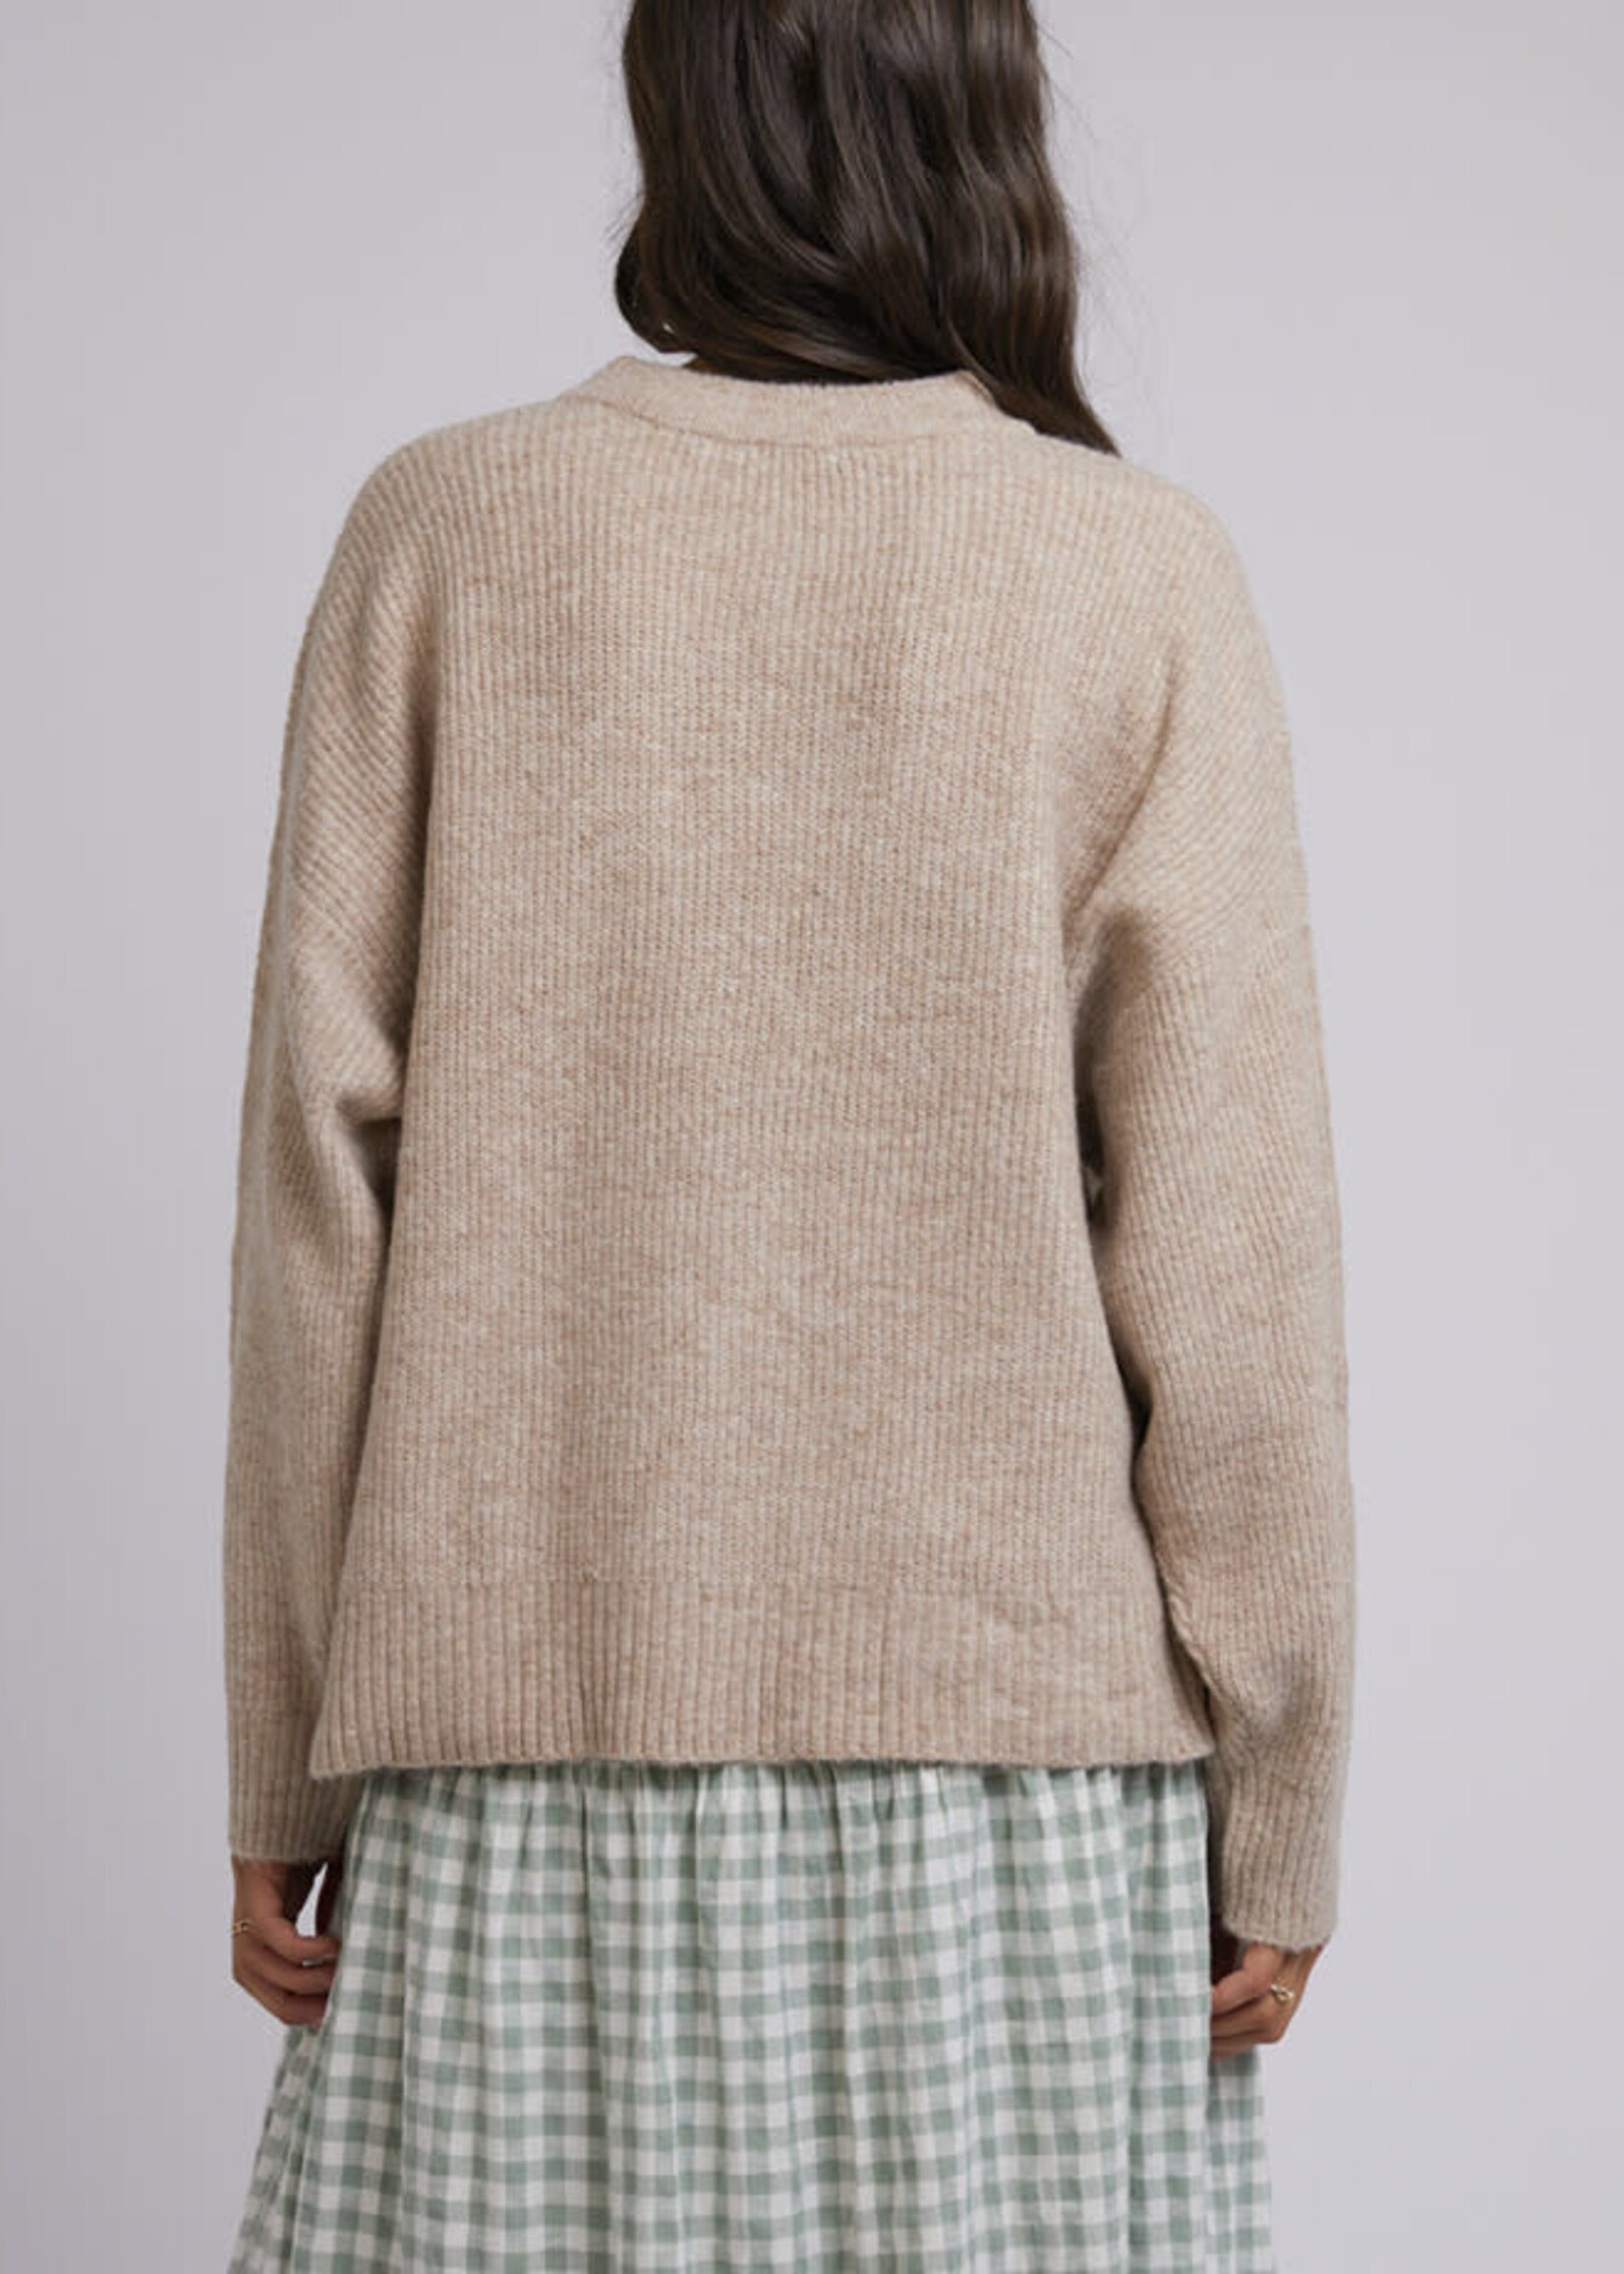 All About Eve Kendal Knit (K)